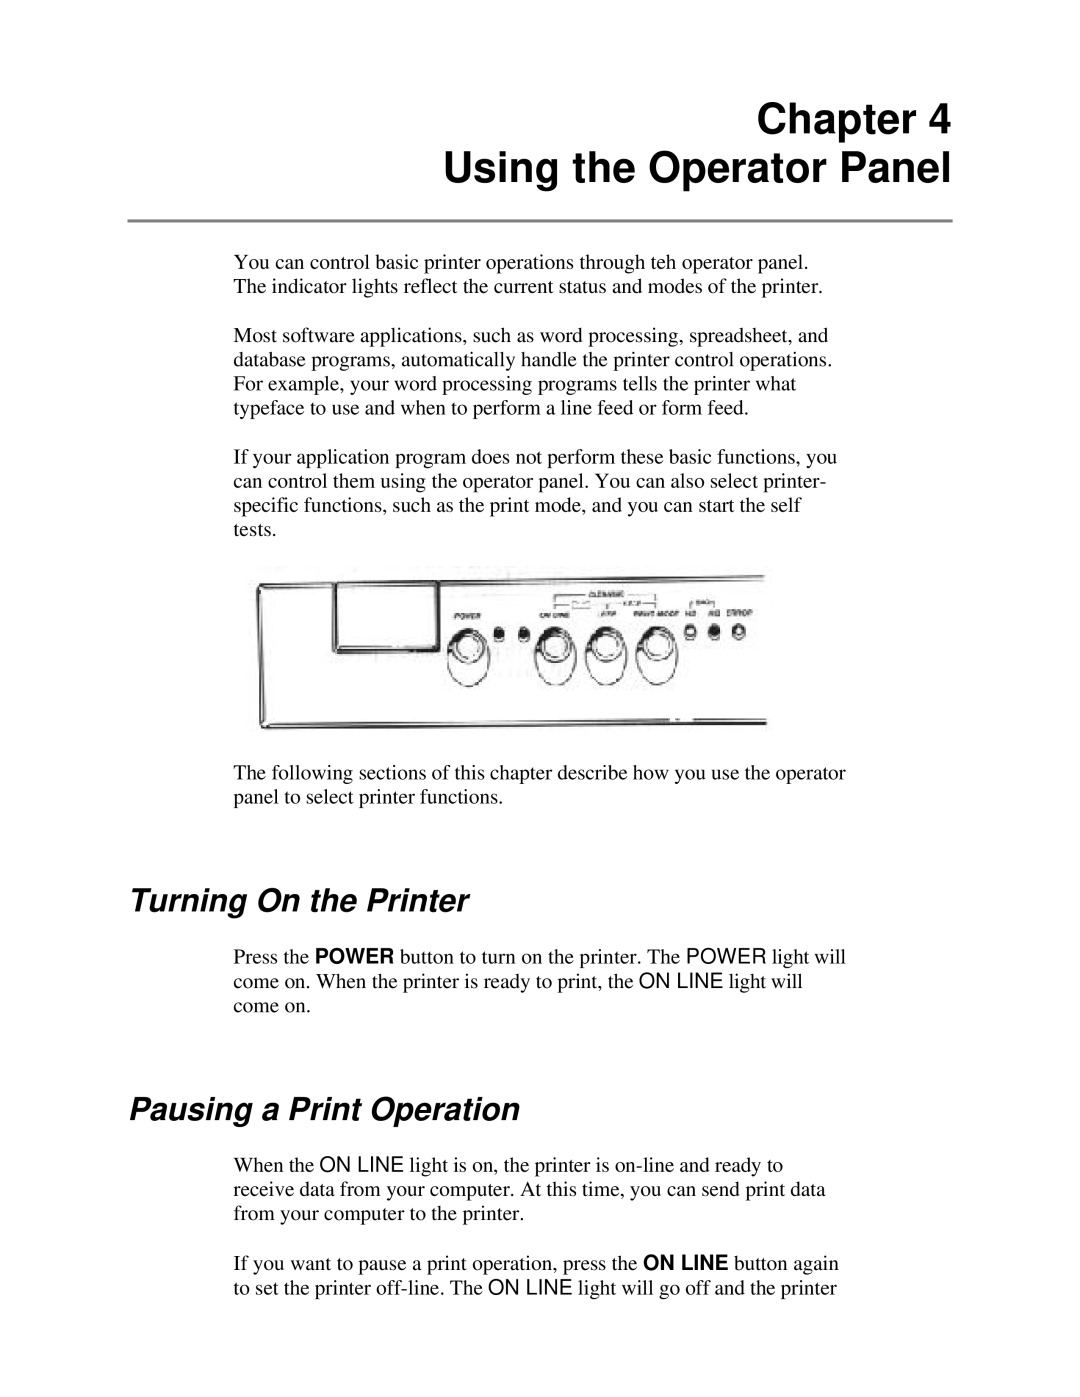 Canon BJ-230 user manual Chapter Using the Operator Panel, Turning On the Printer, Pausing a Print Operation 